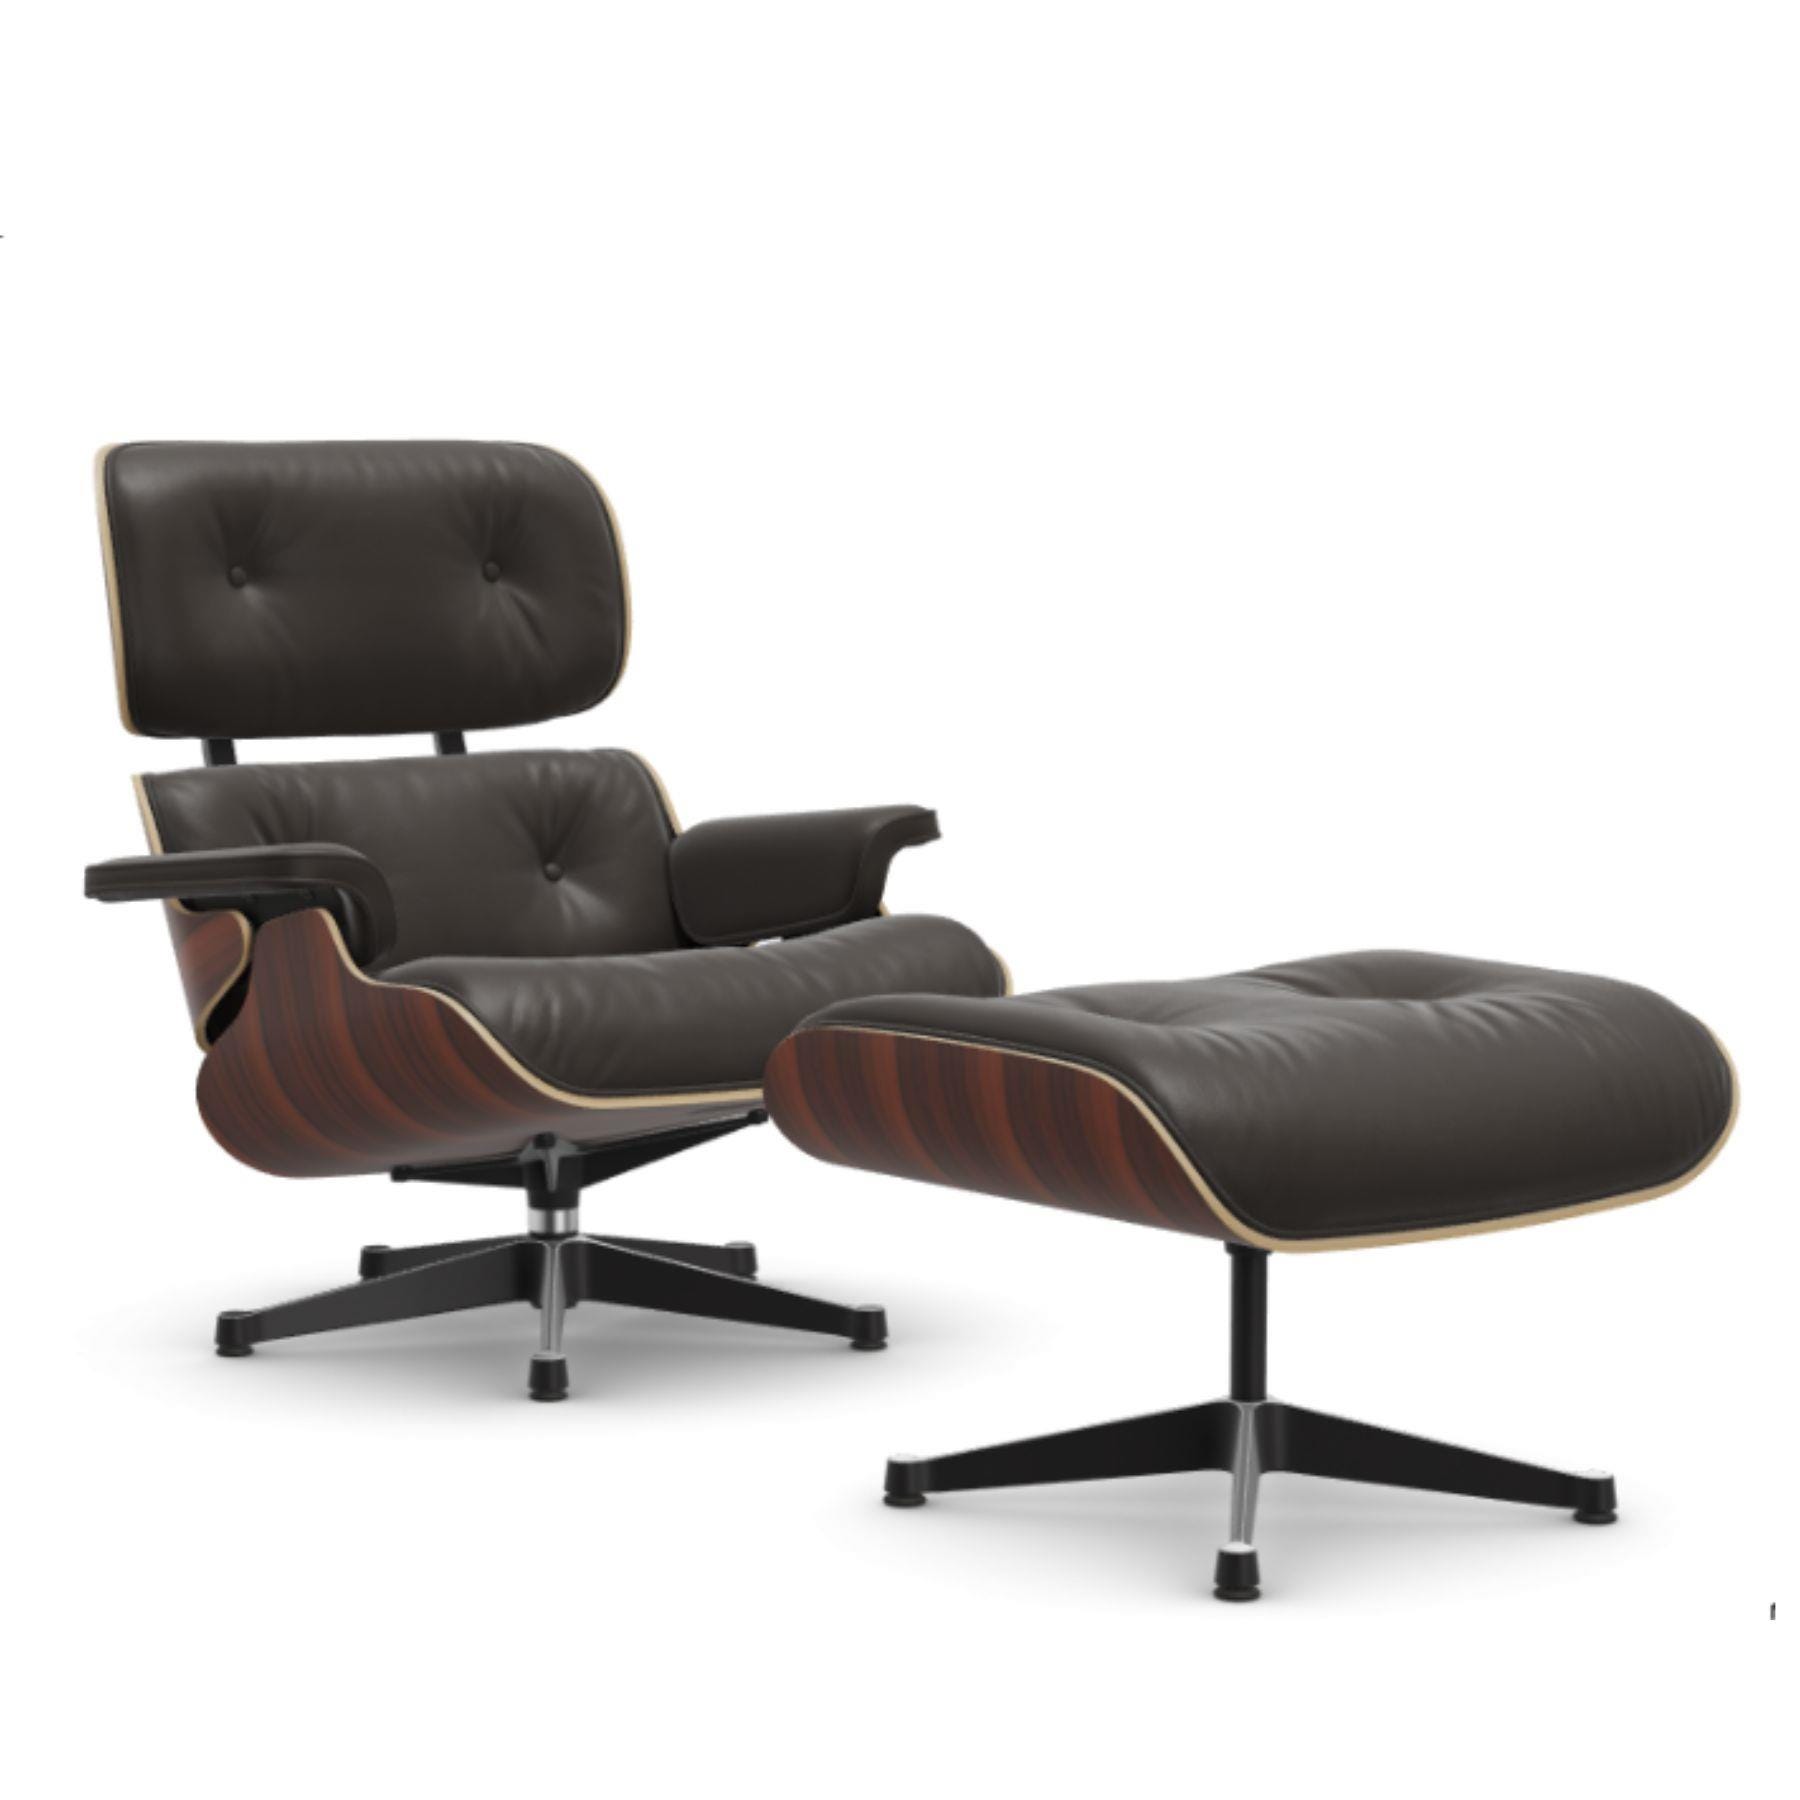 Vitra Eames Lounge Chair Santos Palisander Leather Natural F Chocolate Polished Black With Ottoman Light Wood Designer Furniture From Holloways Of